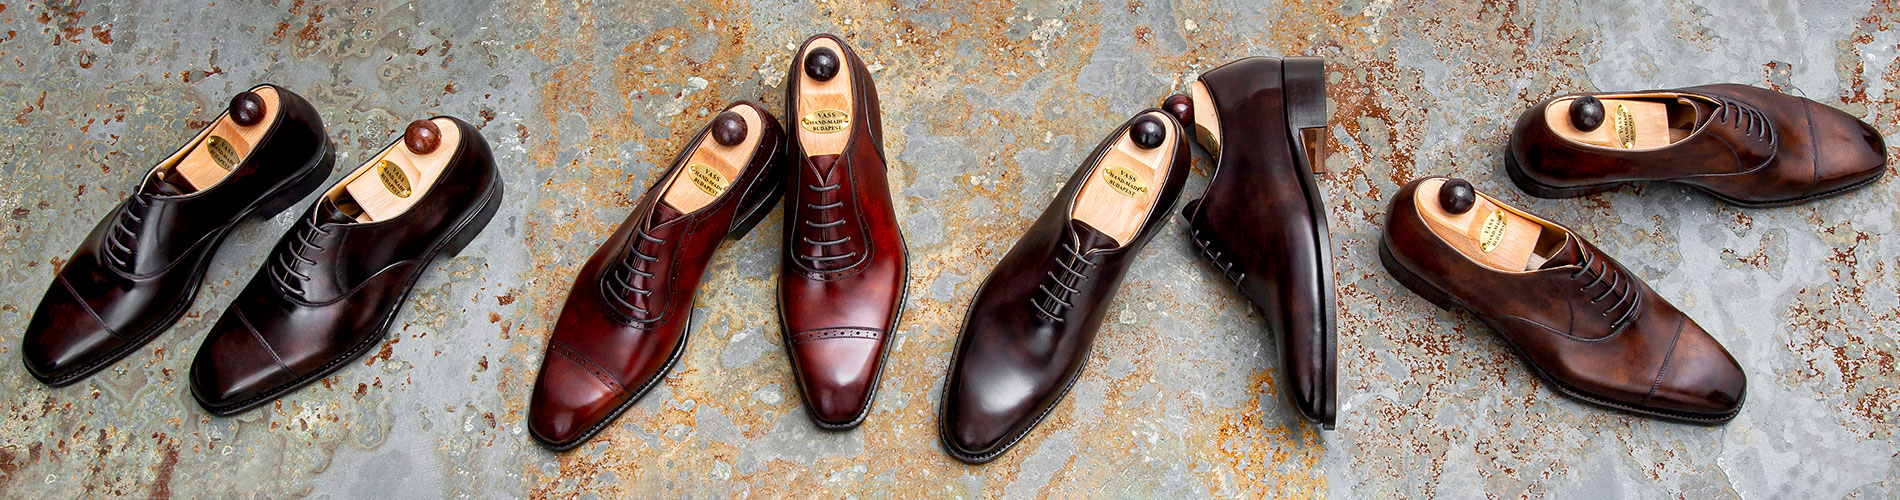 Vass Shoes webshop - handcrafted shoes